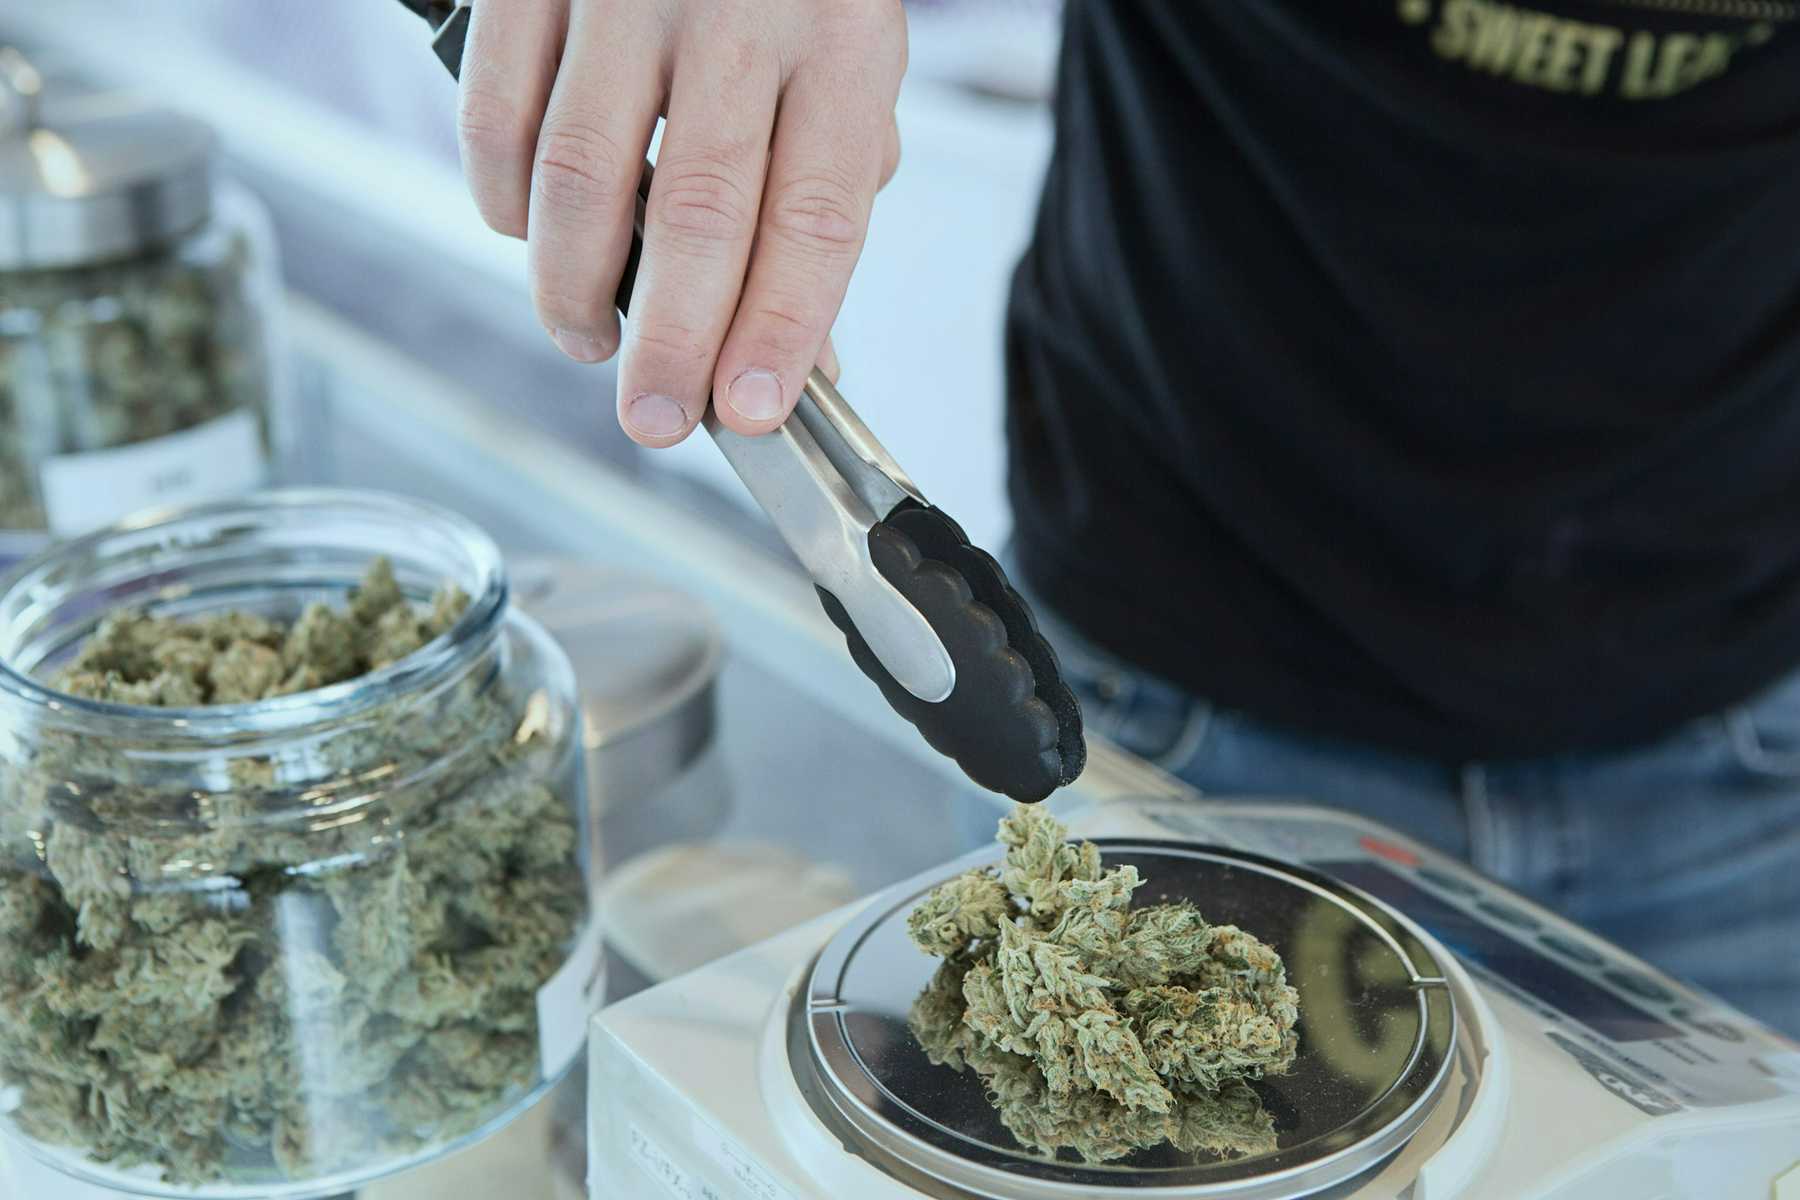 Weighing cannabis buds at a dispensary.